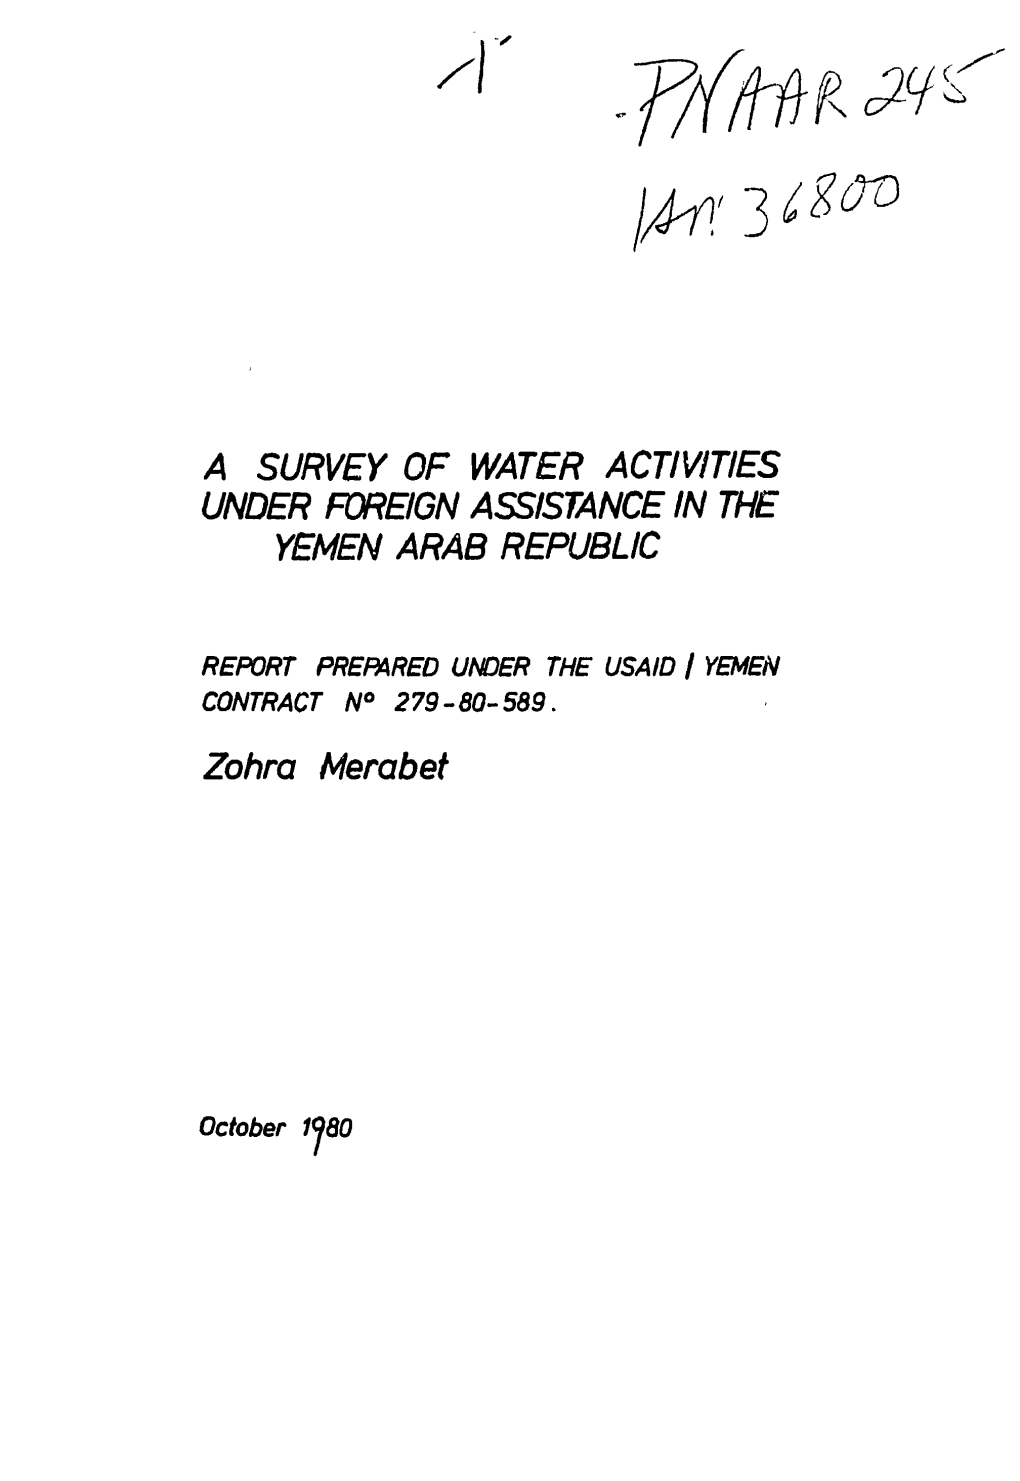 A Survey of Water Activities Under Foreign Assistance in the Yemen Arab Republic